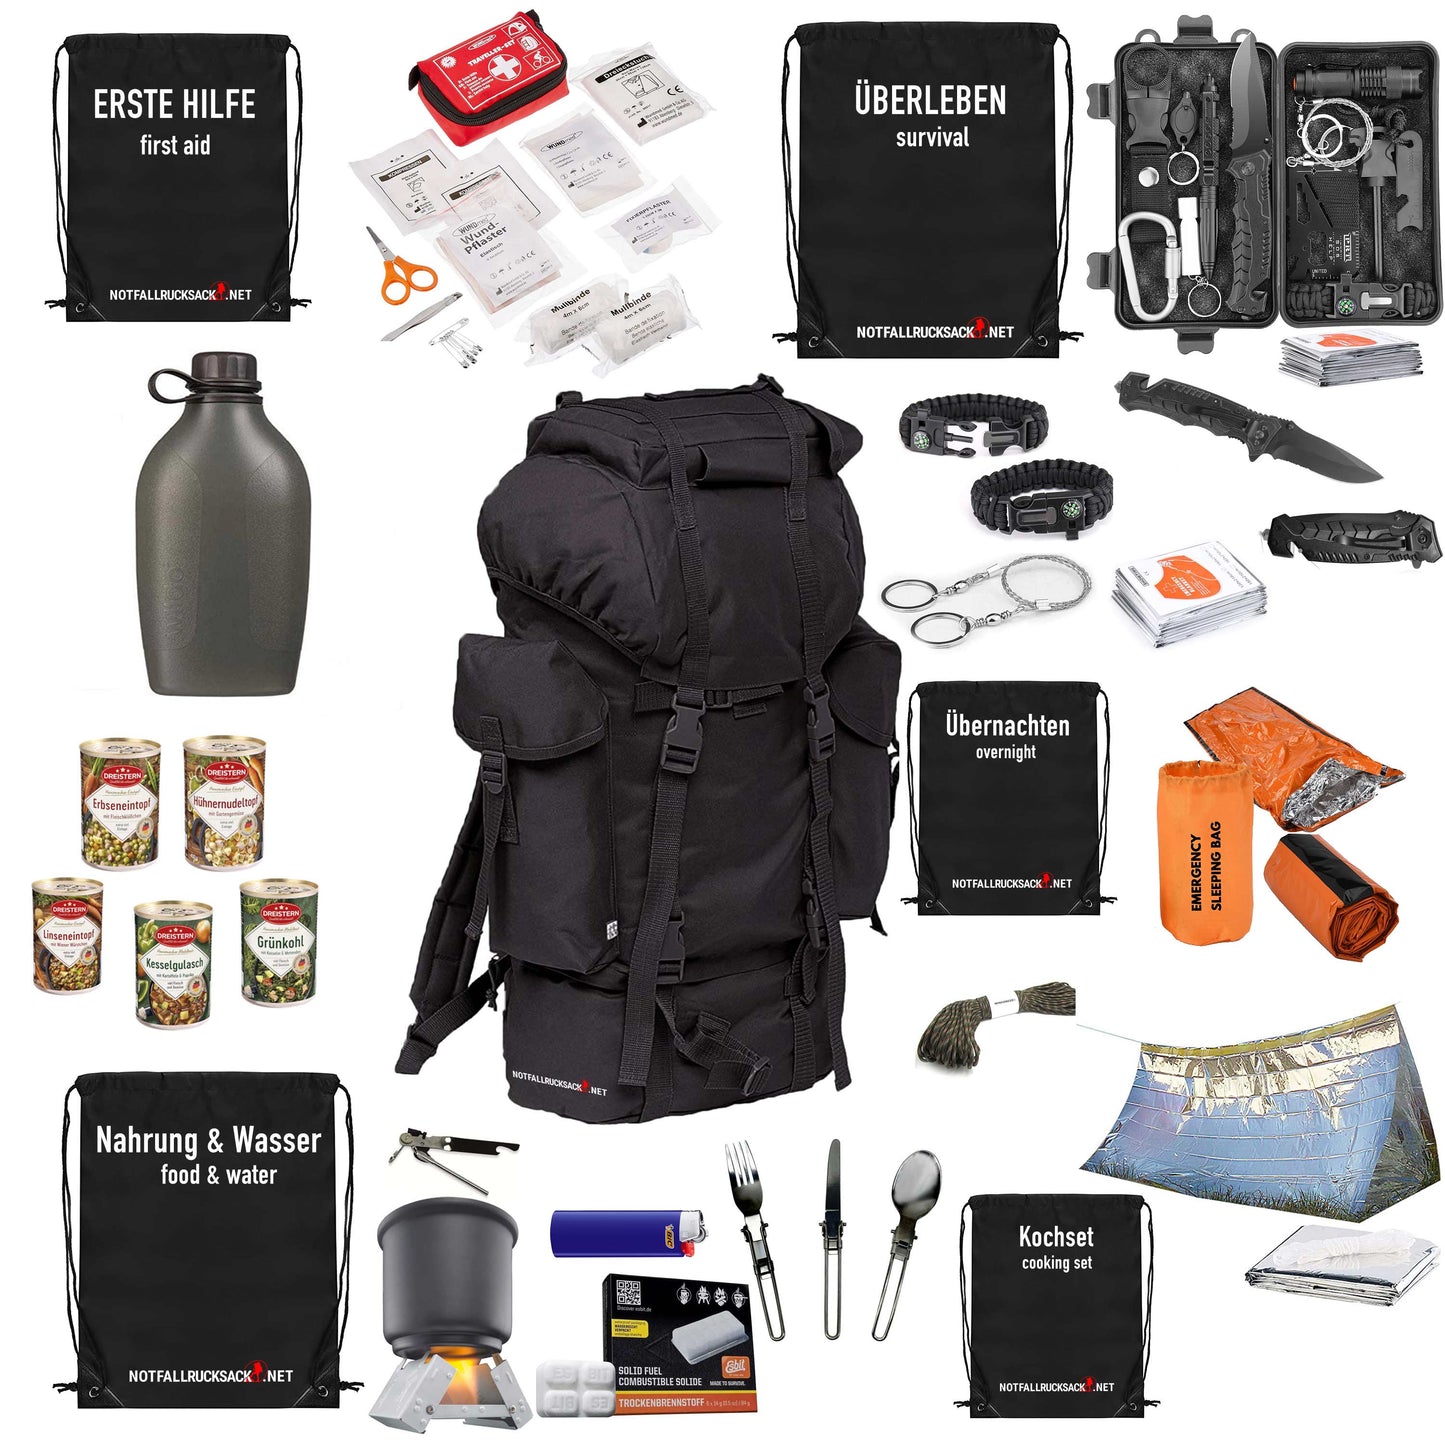 Survival pack backpack filled - including food, sleeping, first aid -